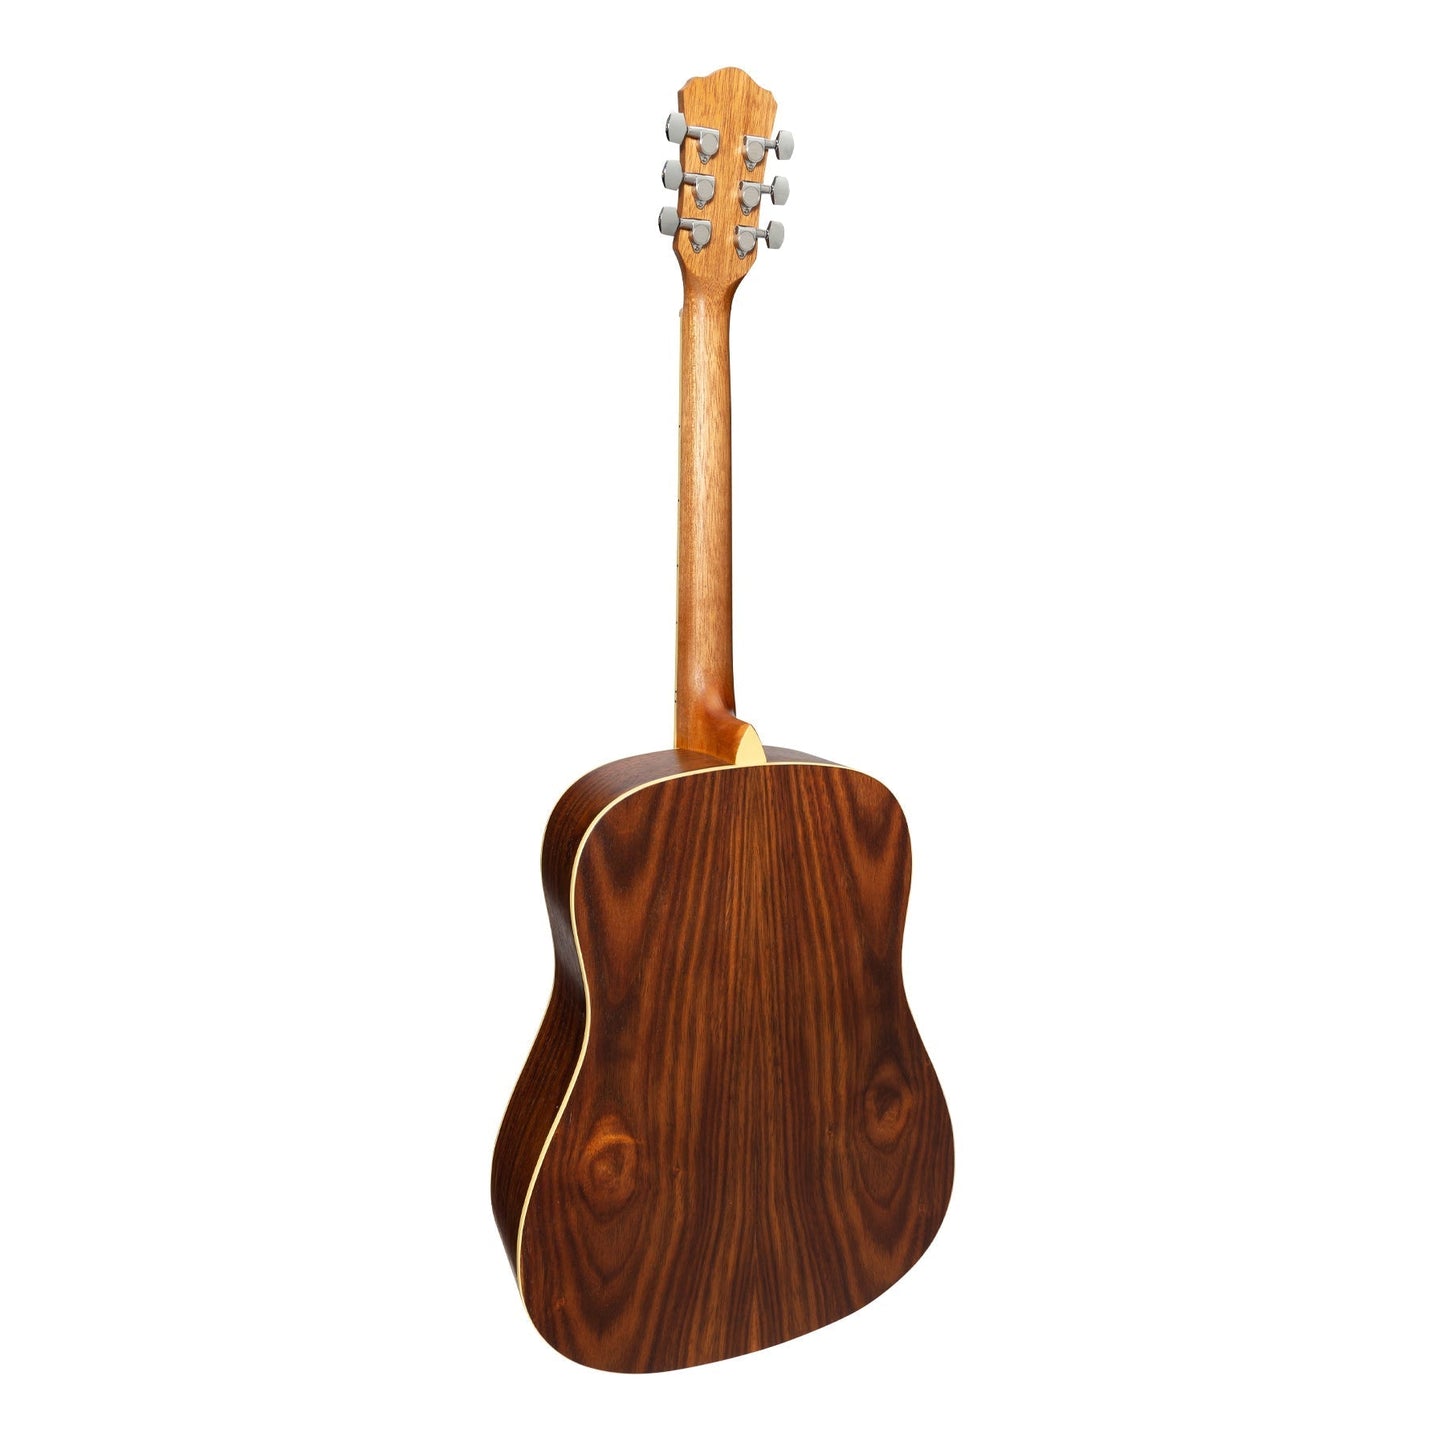 Martinez Left Hand '41 Series'  Dreadnought Acoustic Guitar Pack (Rosewood)